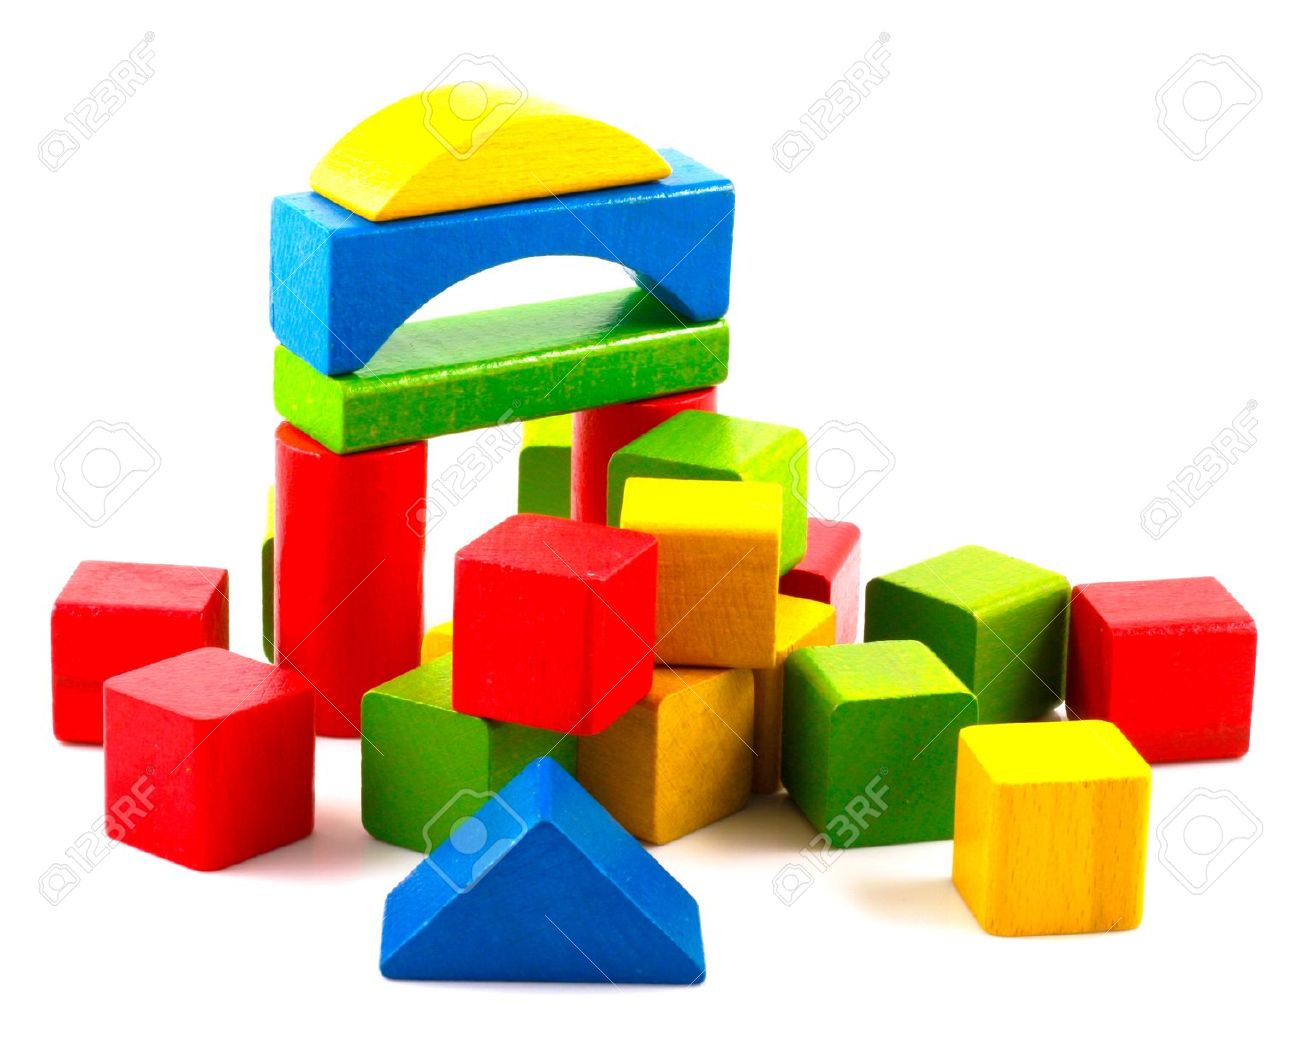 block clipart tower lego